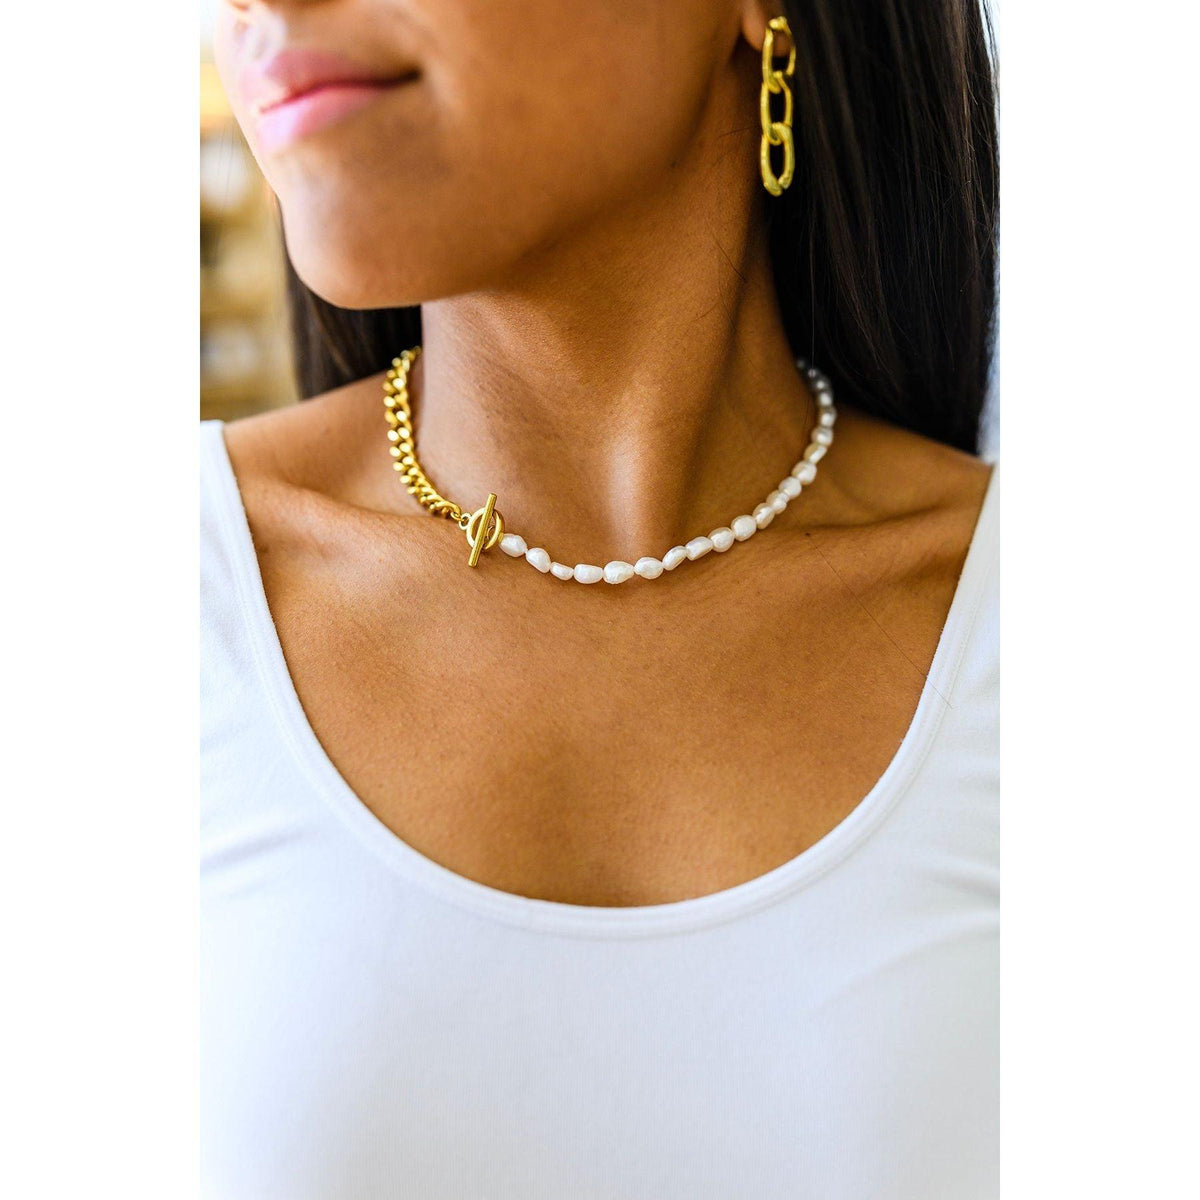 Pearl Moments Necklace - becauseofadi